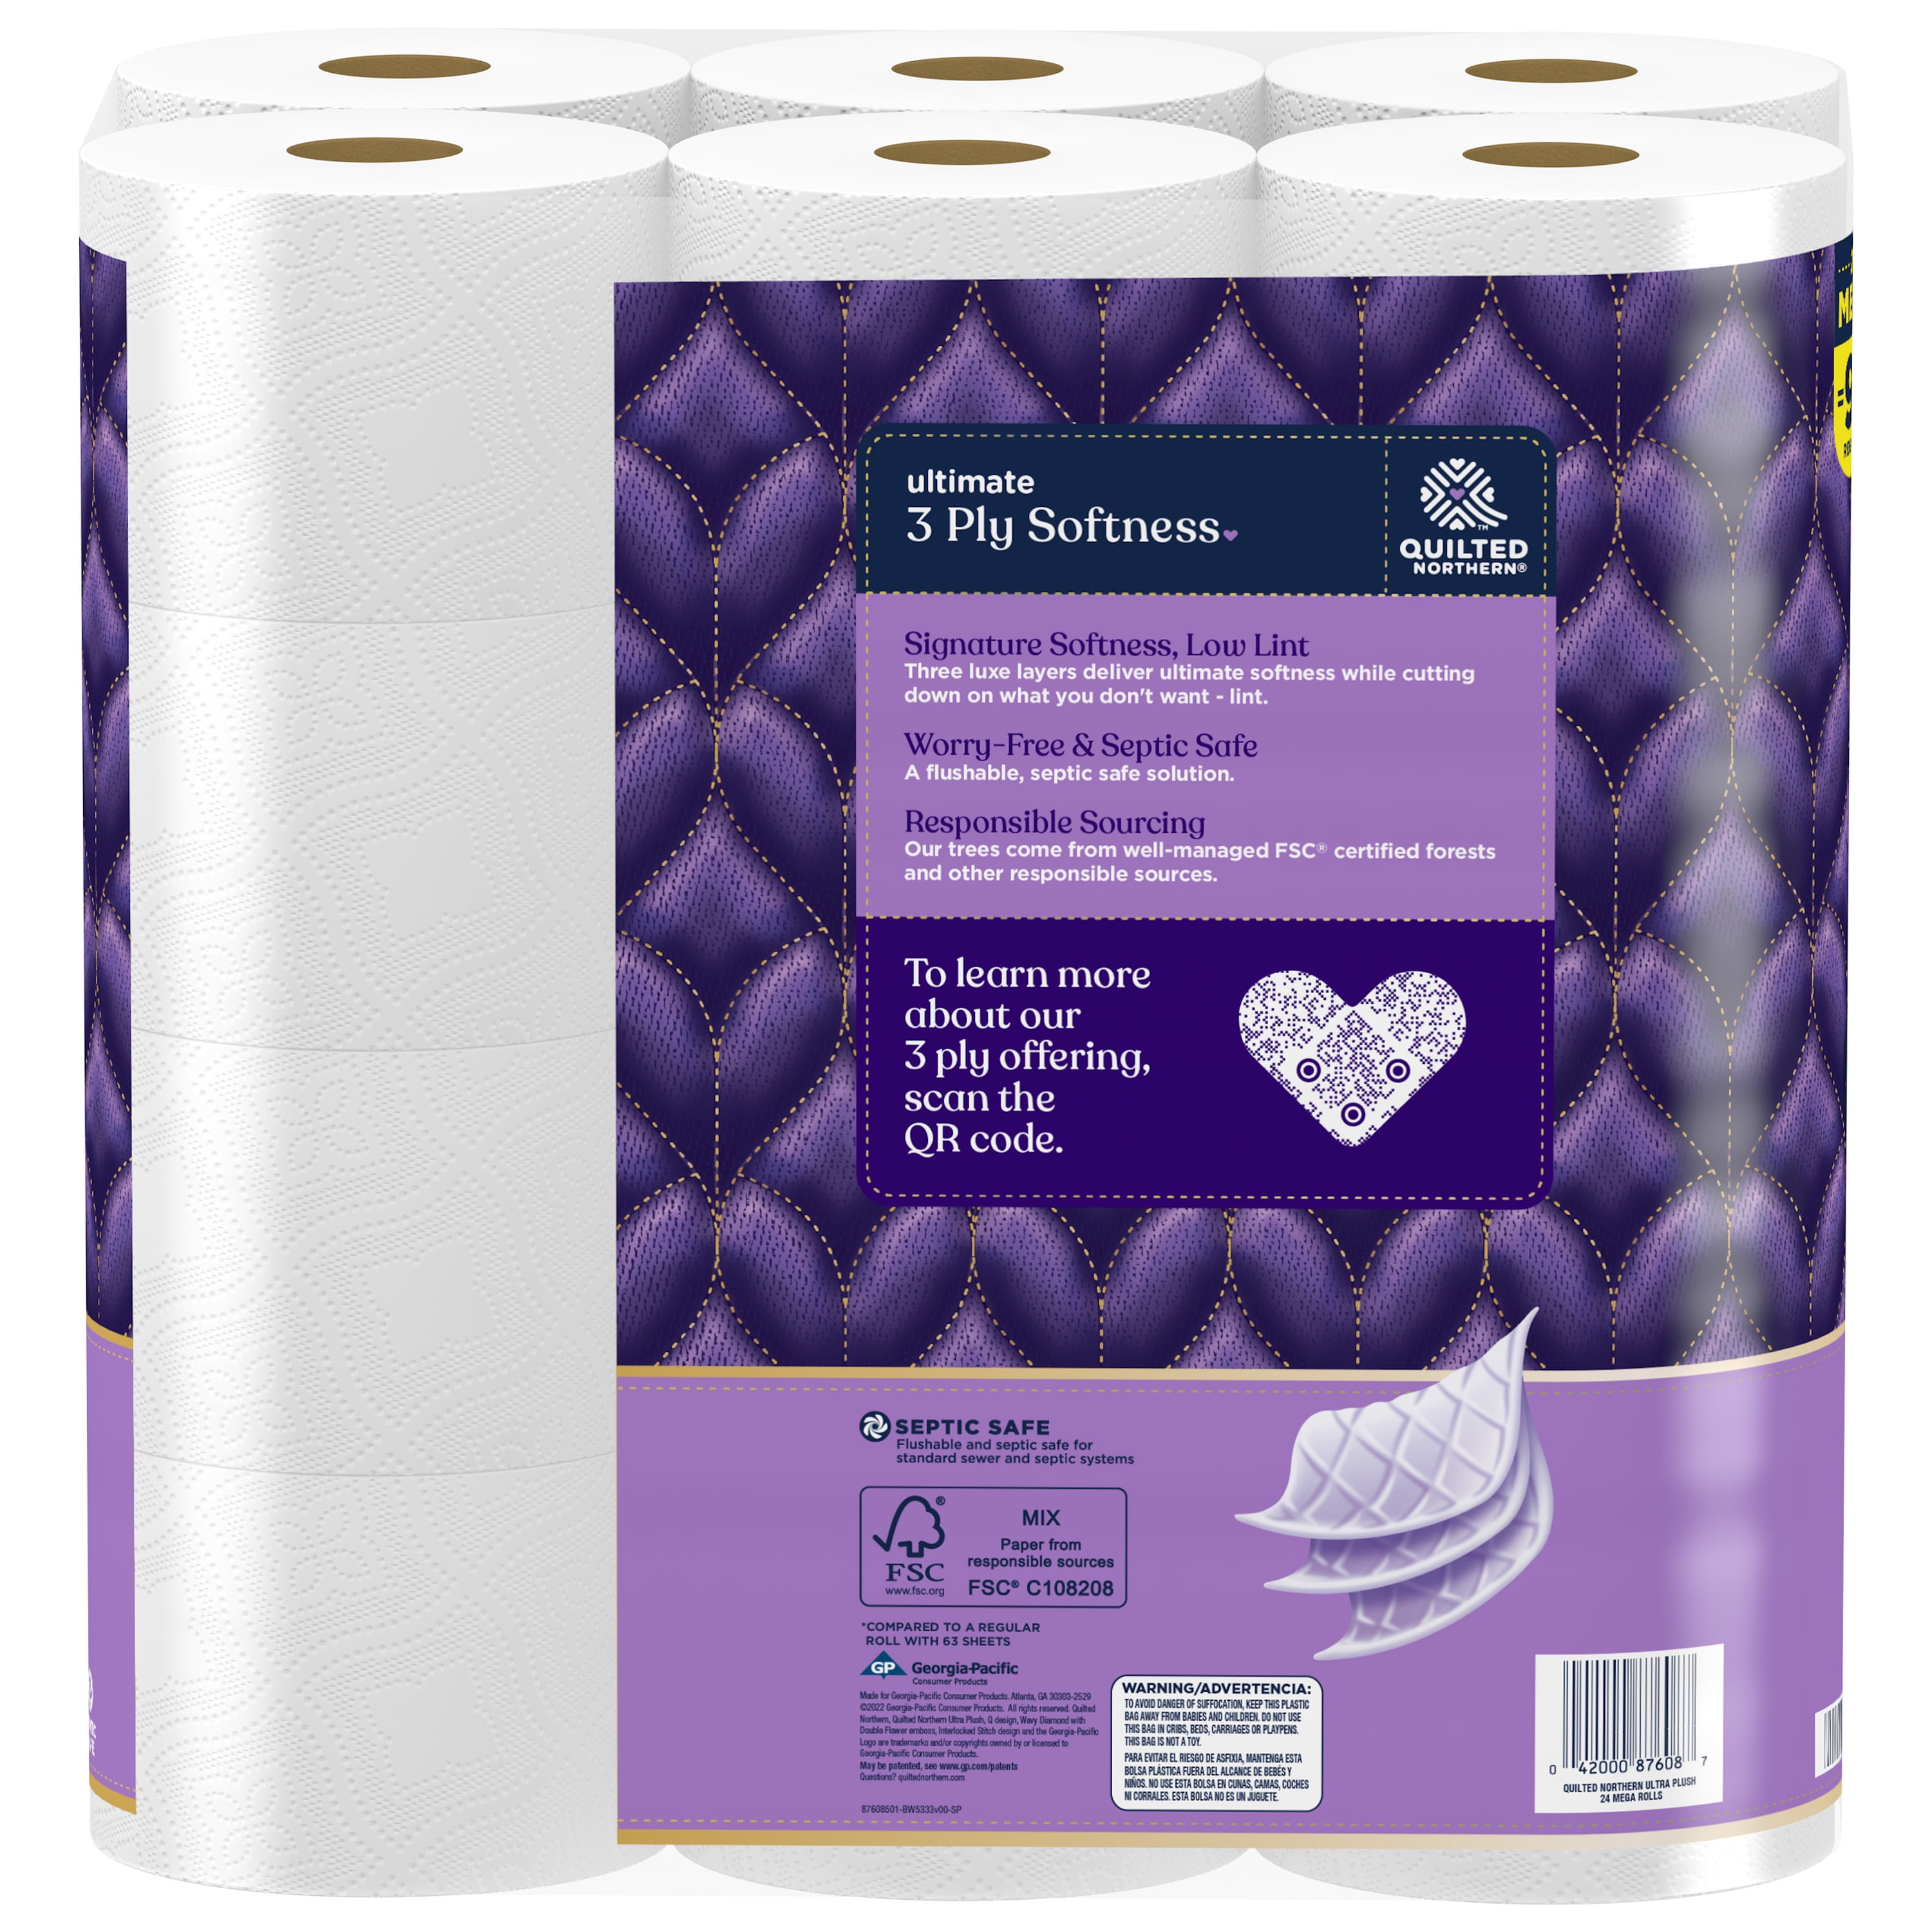 Quilted Northern Ultra Plush Bathroom Tissue, Unscented, Mega Rolls, 3-Ply - 24 rolls